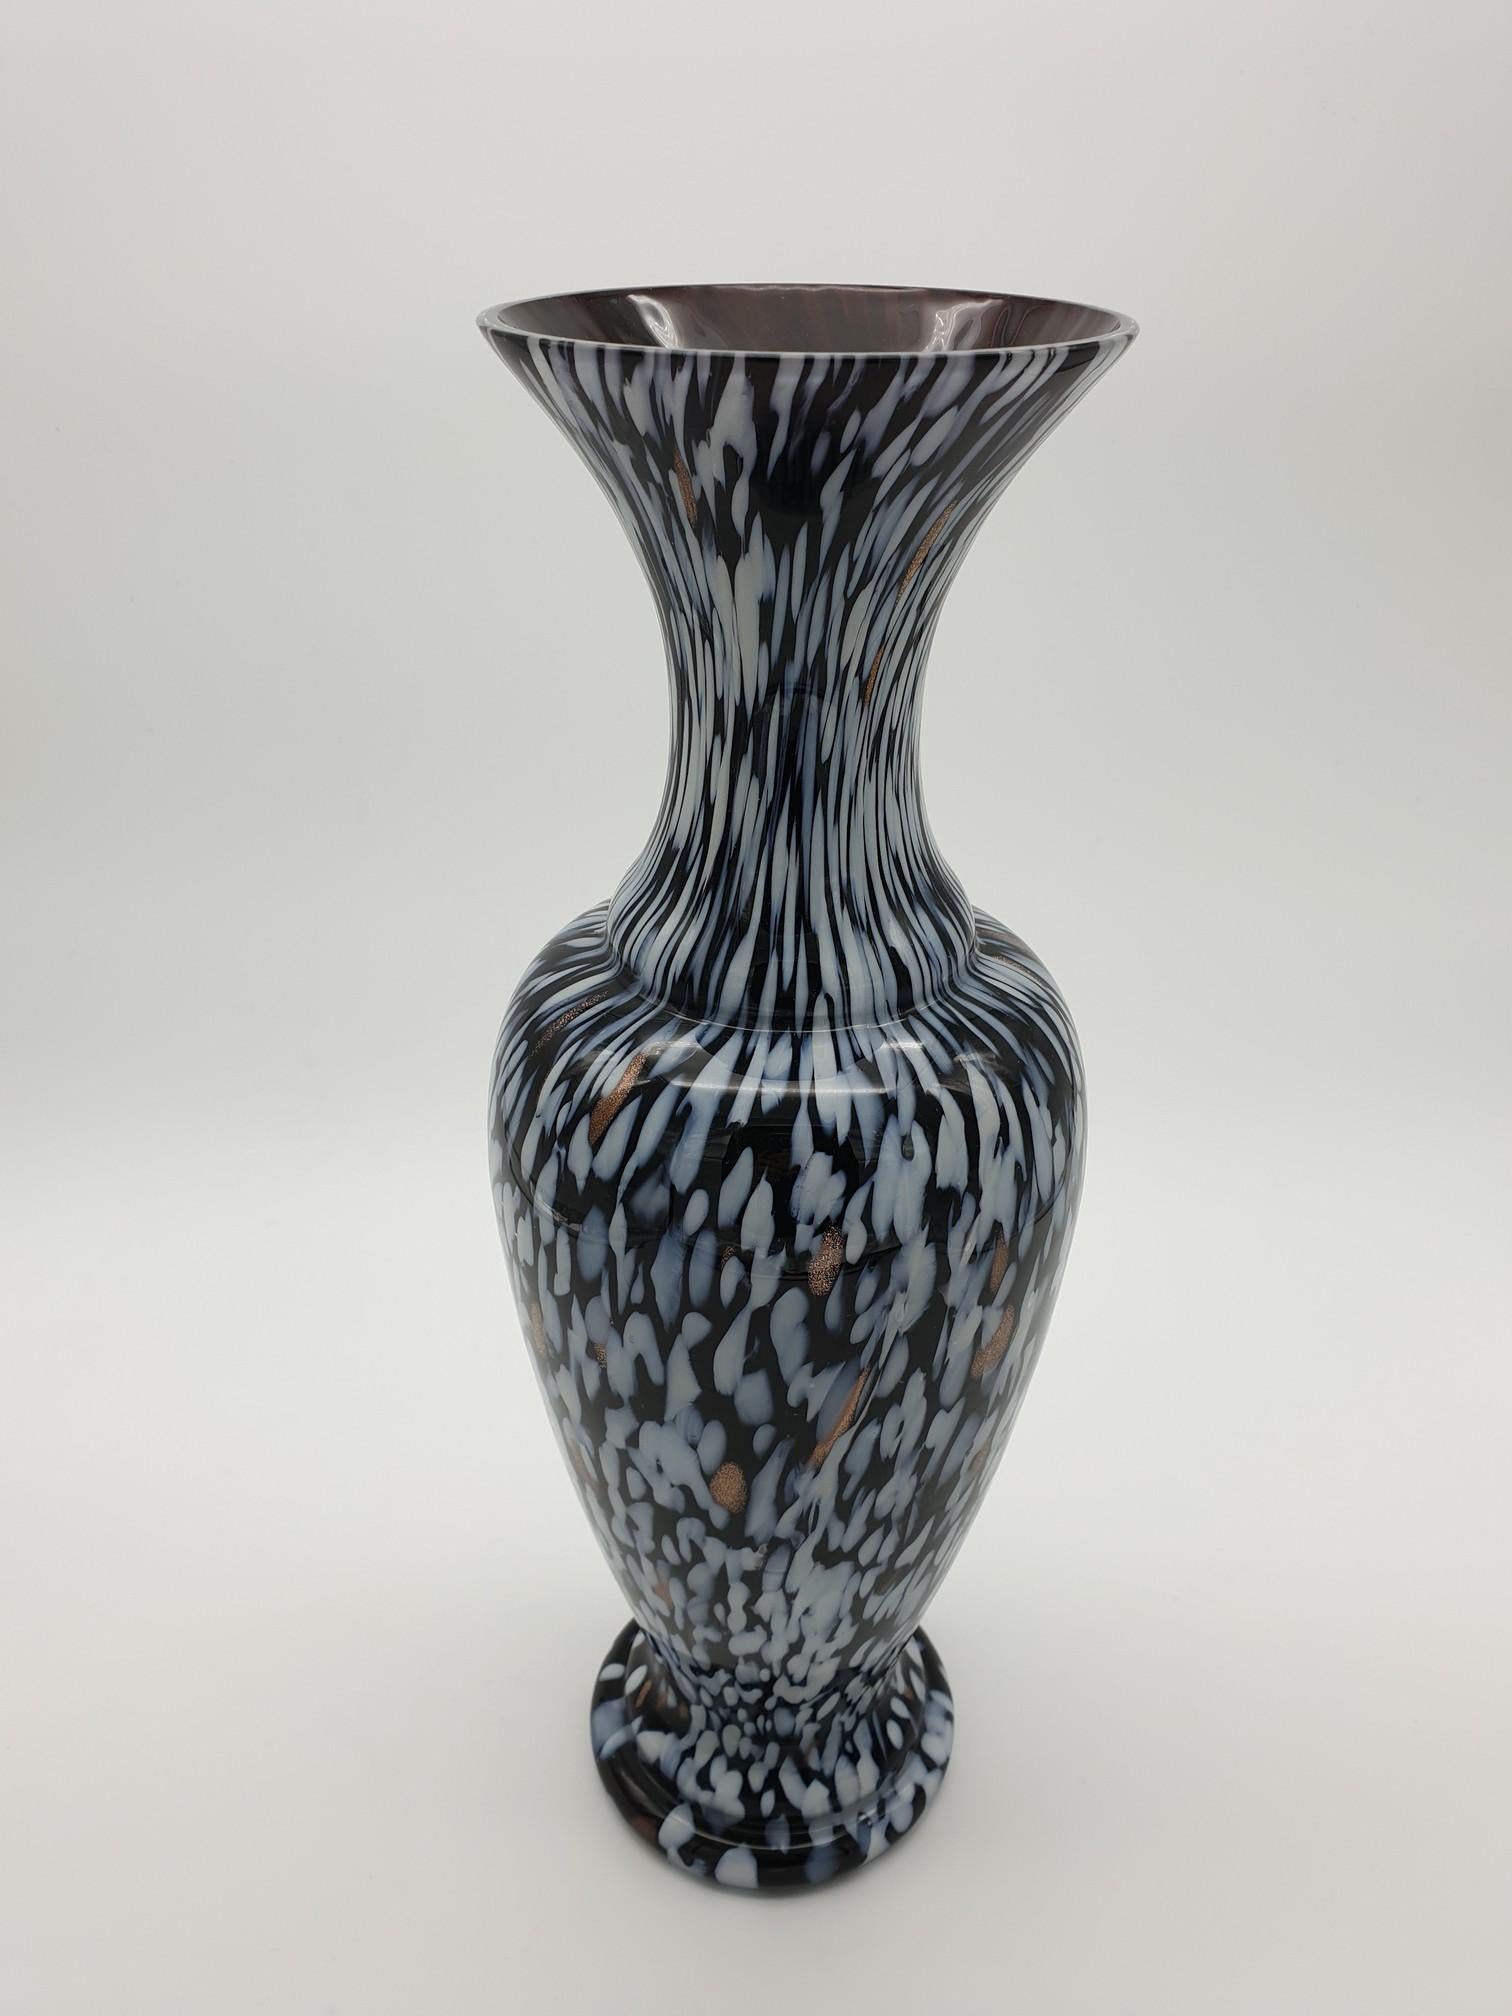 Vintage glass vase by Gino Cenedese e Figlio, handmade in the late 1970s in Murano. This tall black vase (41cm tall) features contrasting white and sparkling 